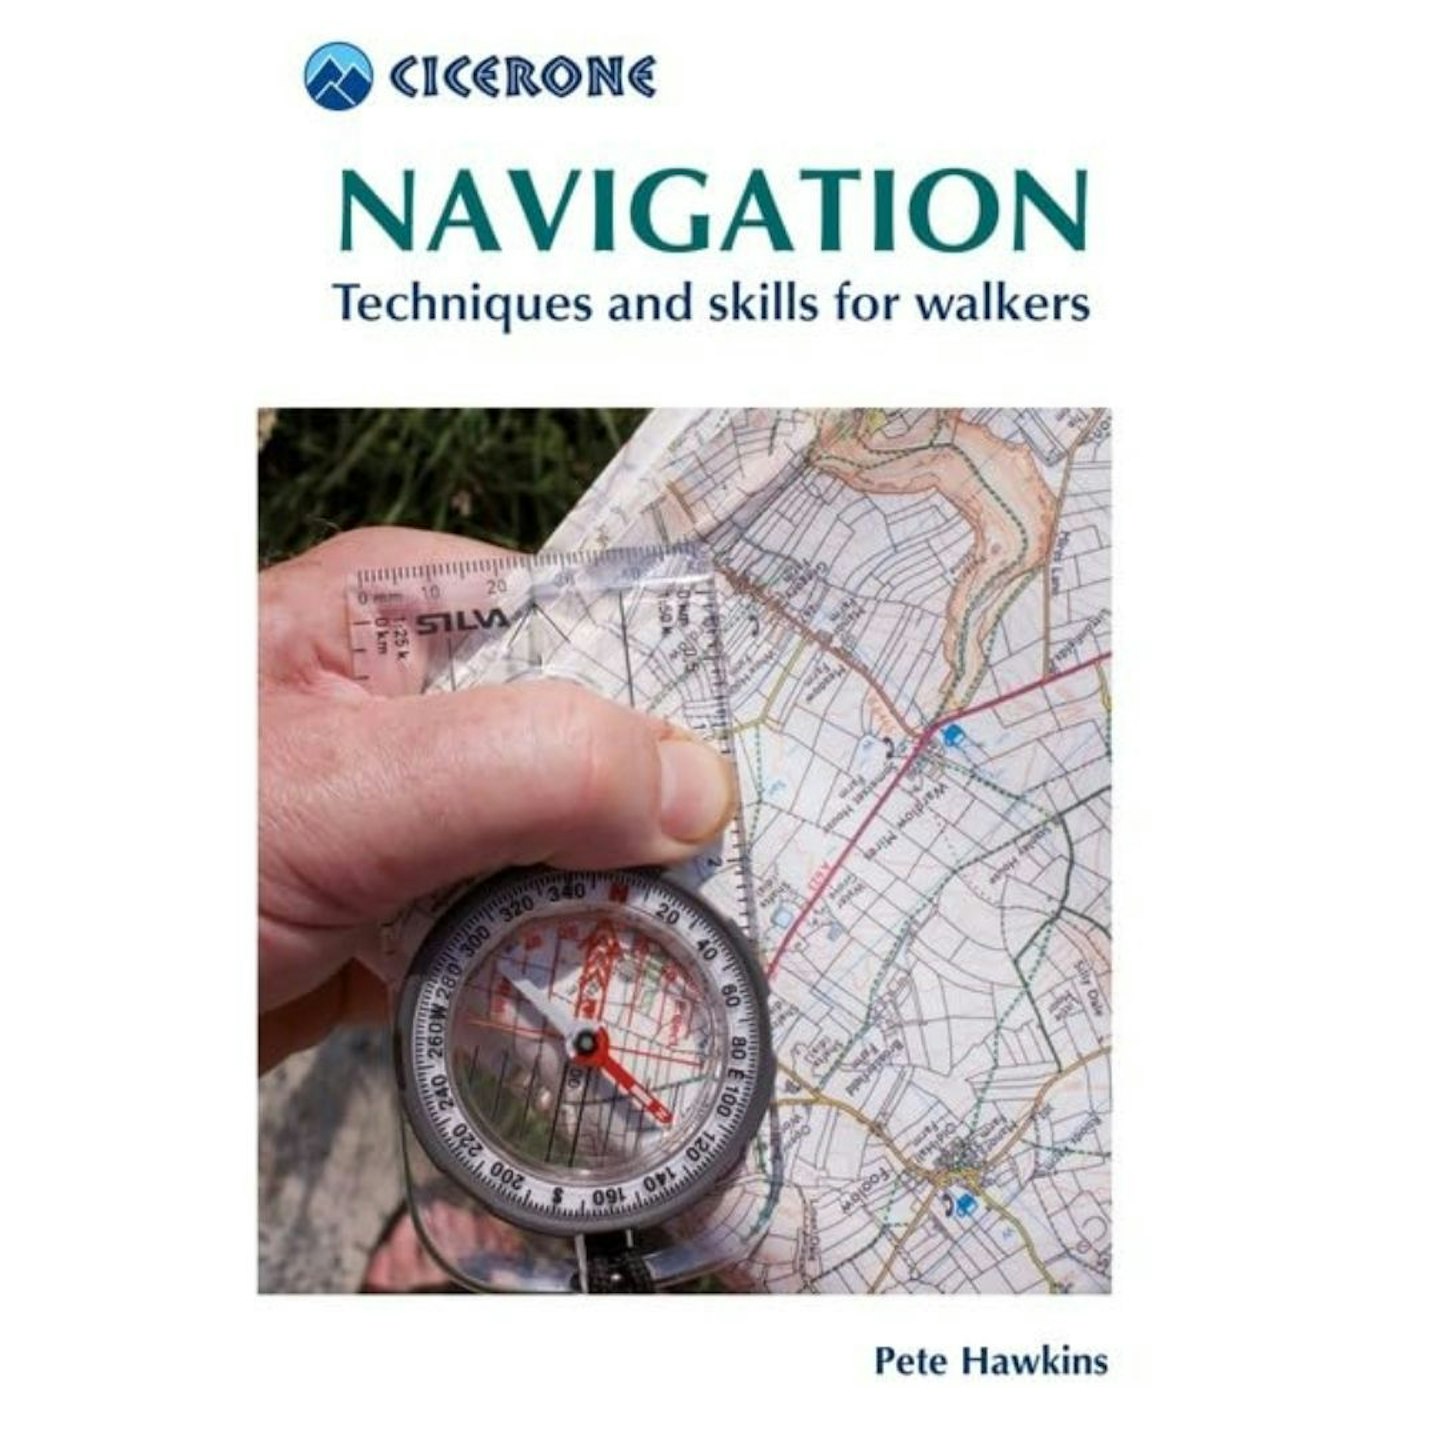 Navigation Techniques and skills for walkers